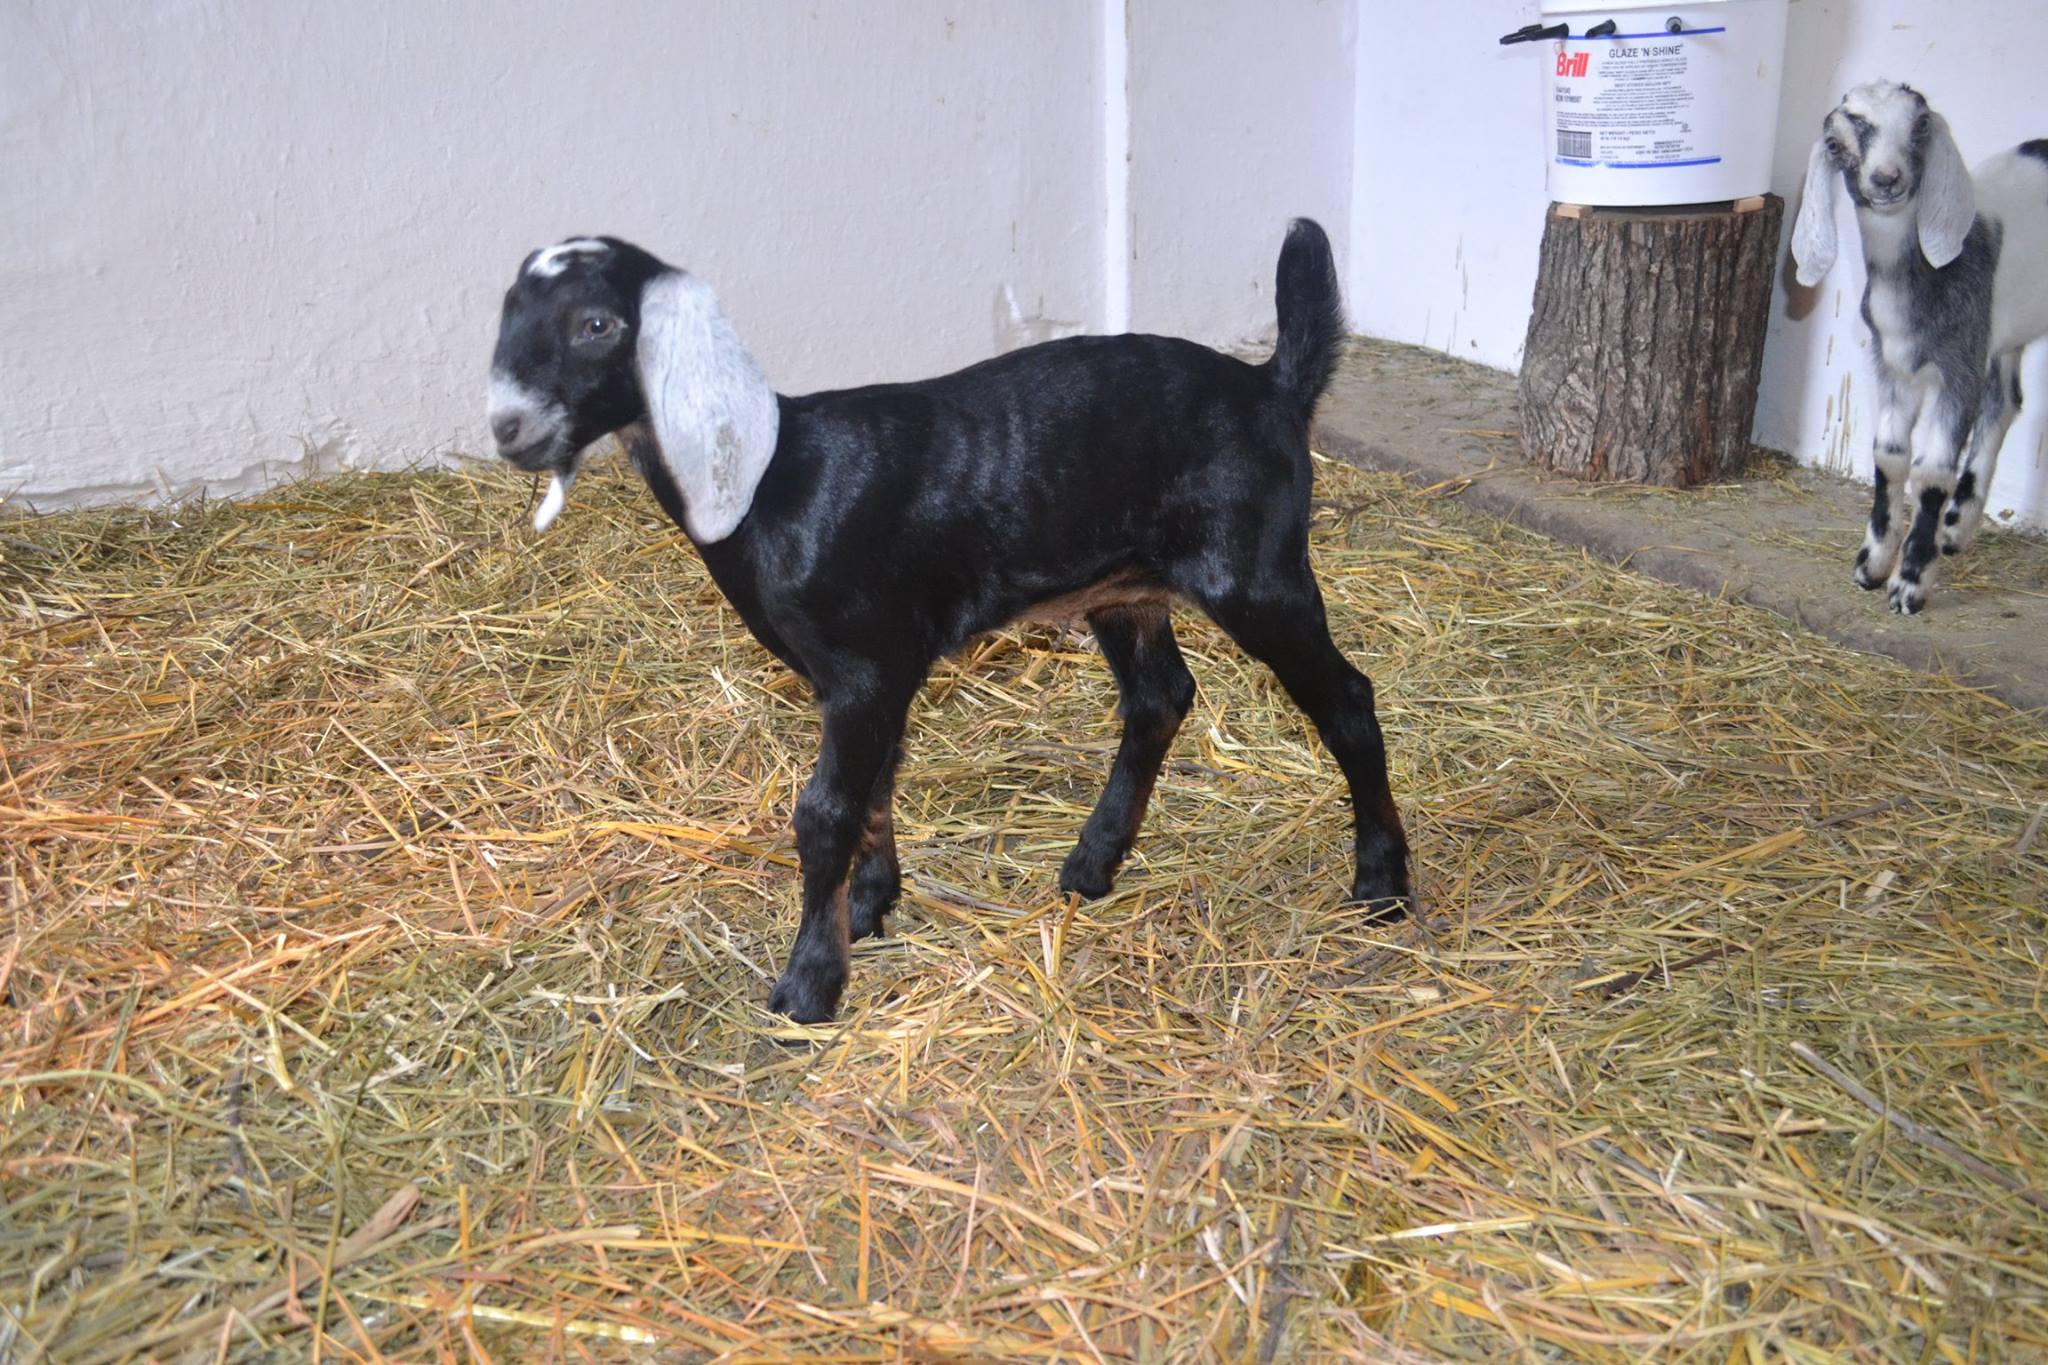 Anglo-Nubian goat from USA